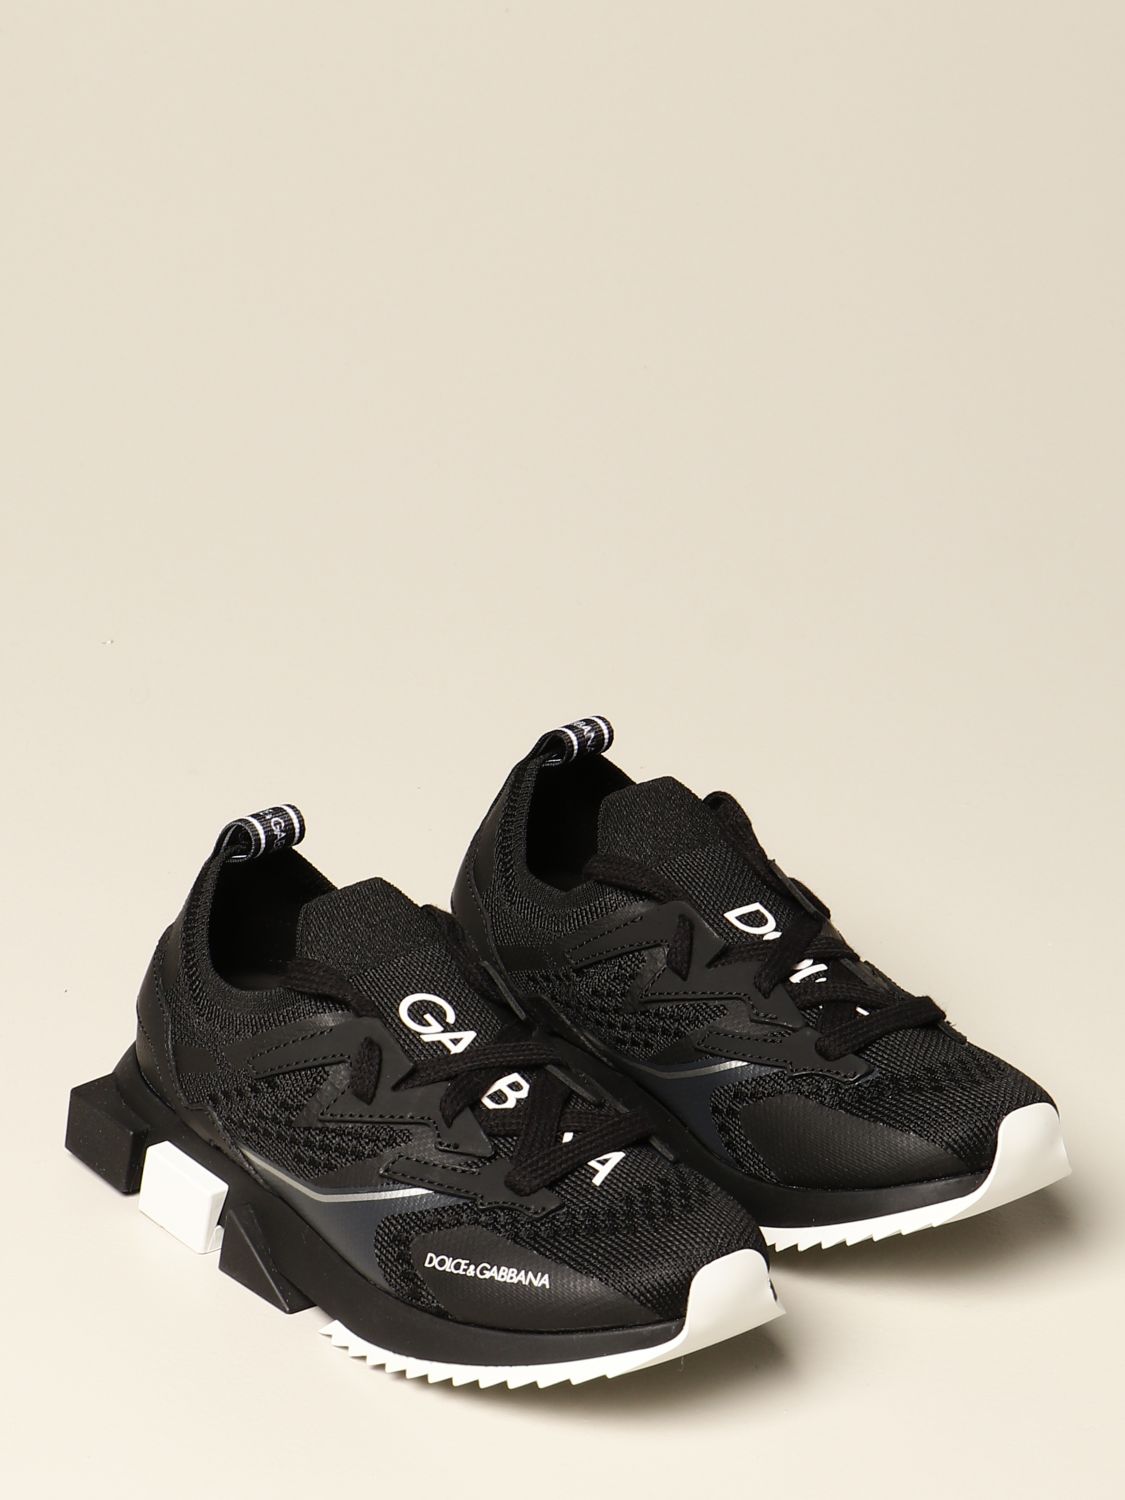 X Generation Dolce & Gabbana sneakers in leather and mesh